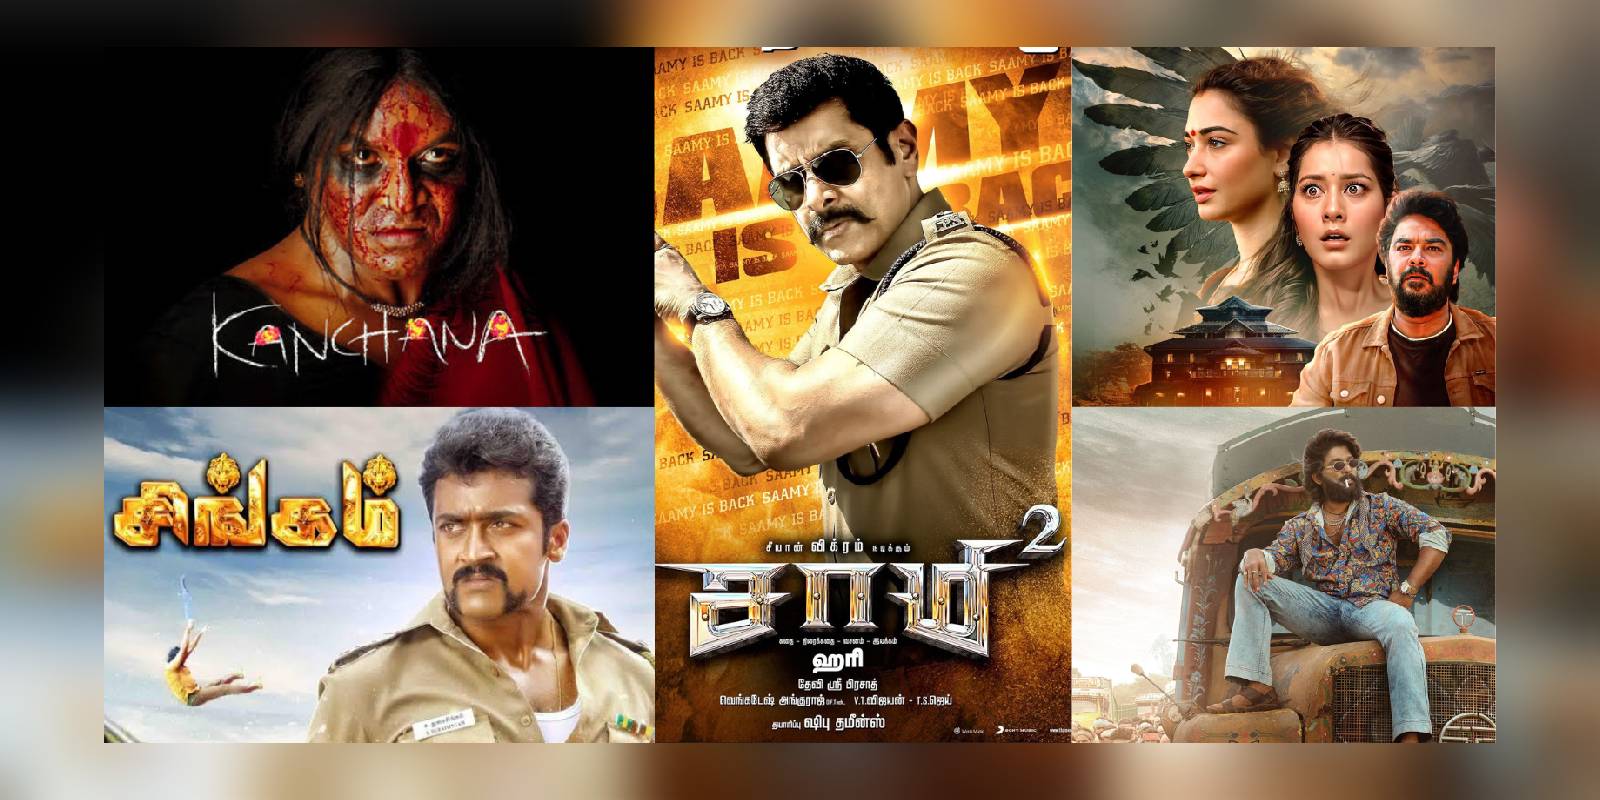 Tamil cinema and its obsession with sequels